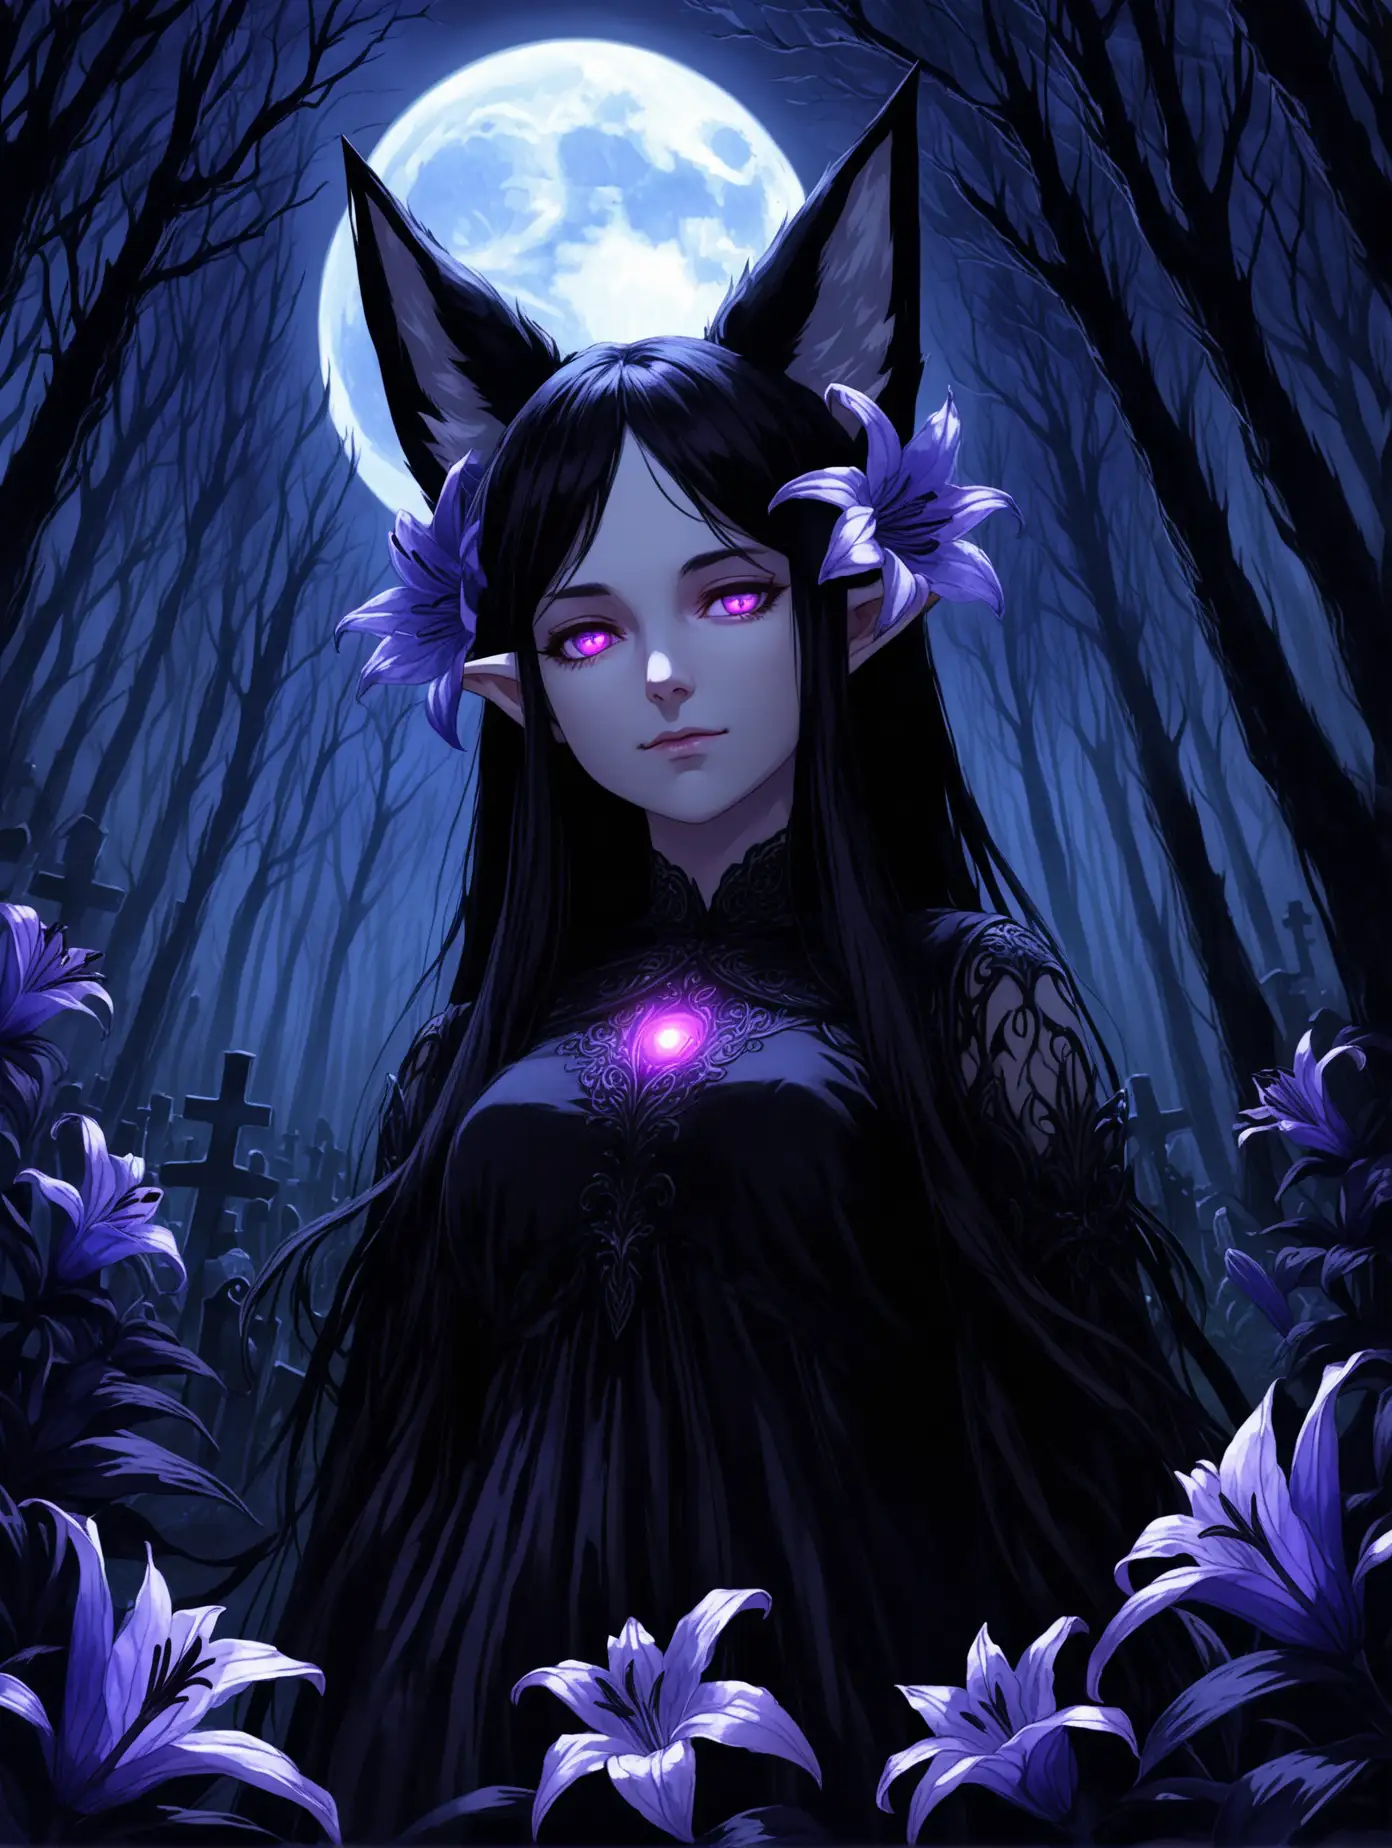 Arrogant-Fox-Spirit-Woman-with-Five-Tails-and-Purple-Lilies-in-Moonlit-Forest